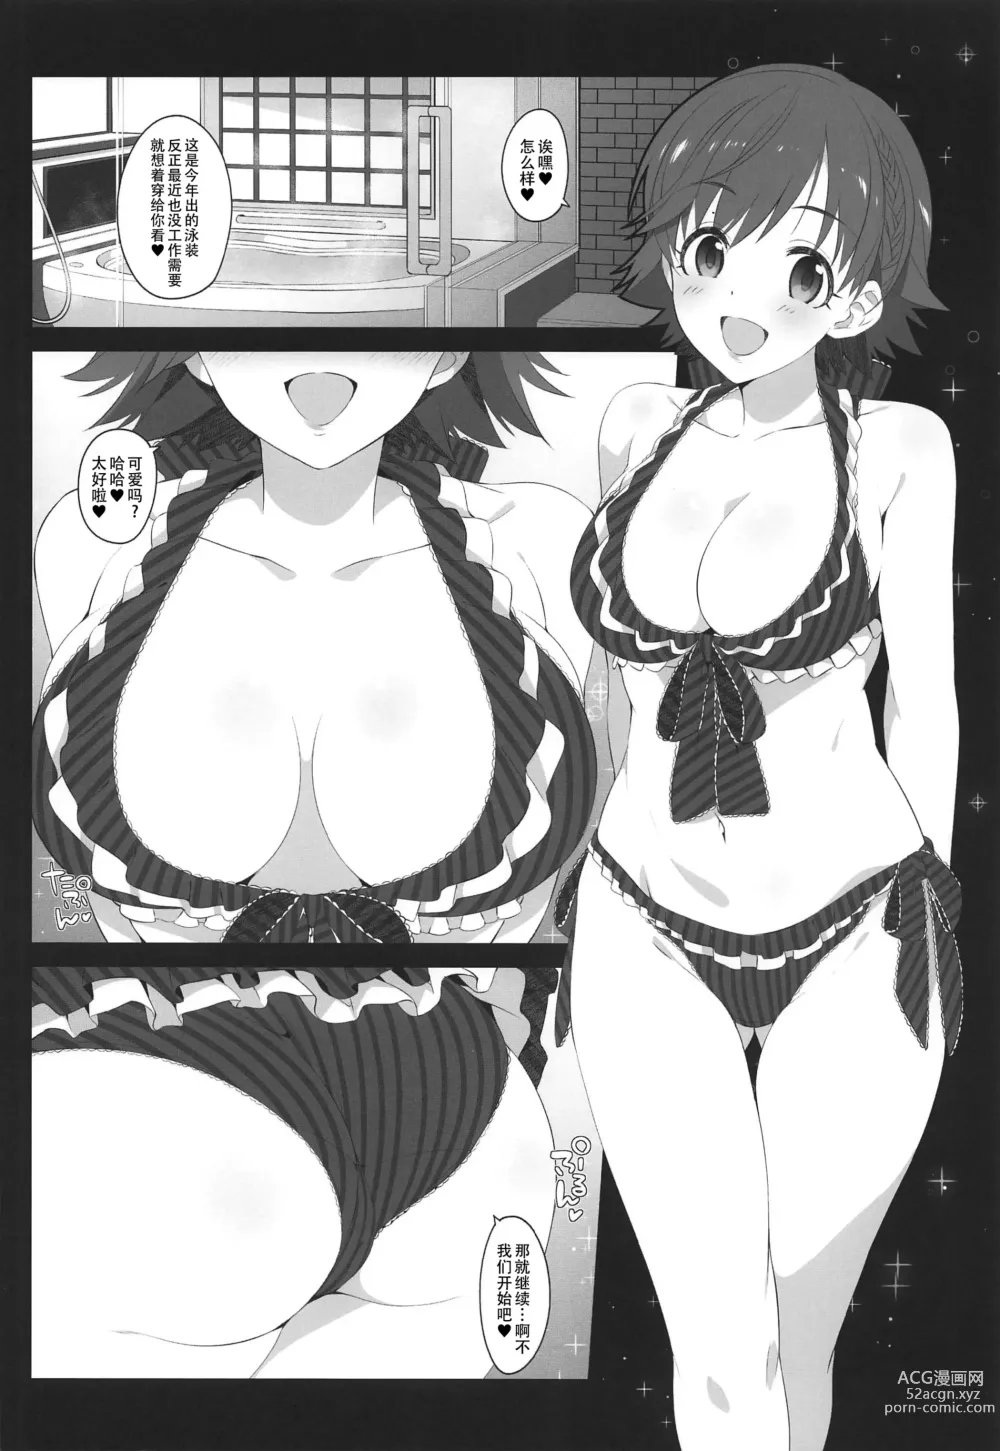 Page 8 of doujinshi Three stars have a dream with sparkles.